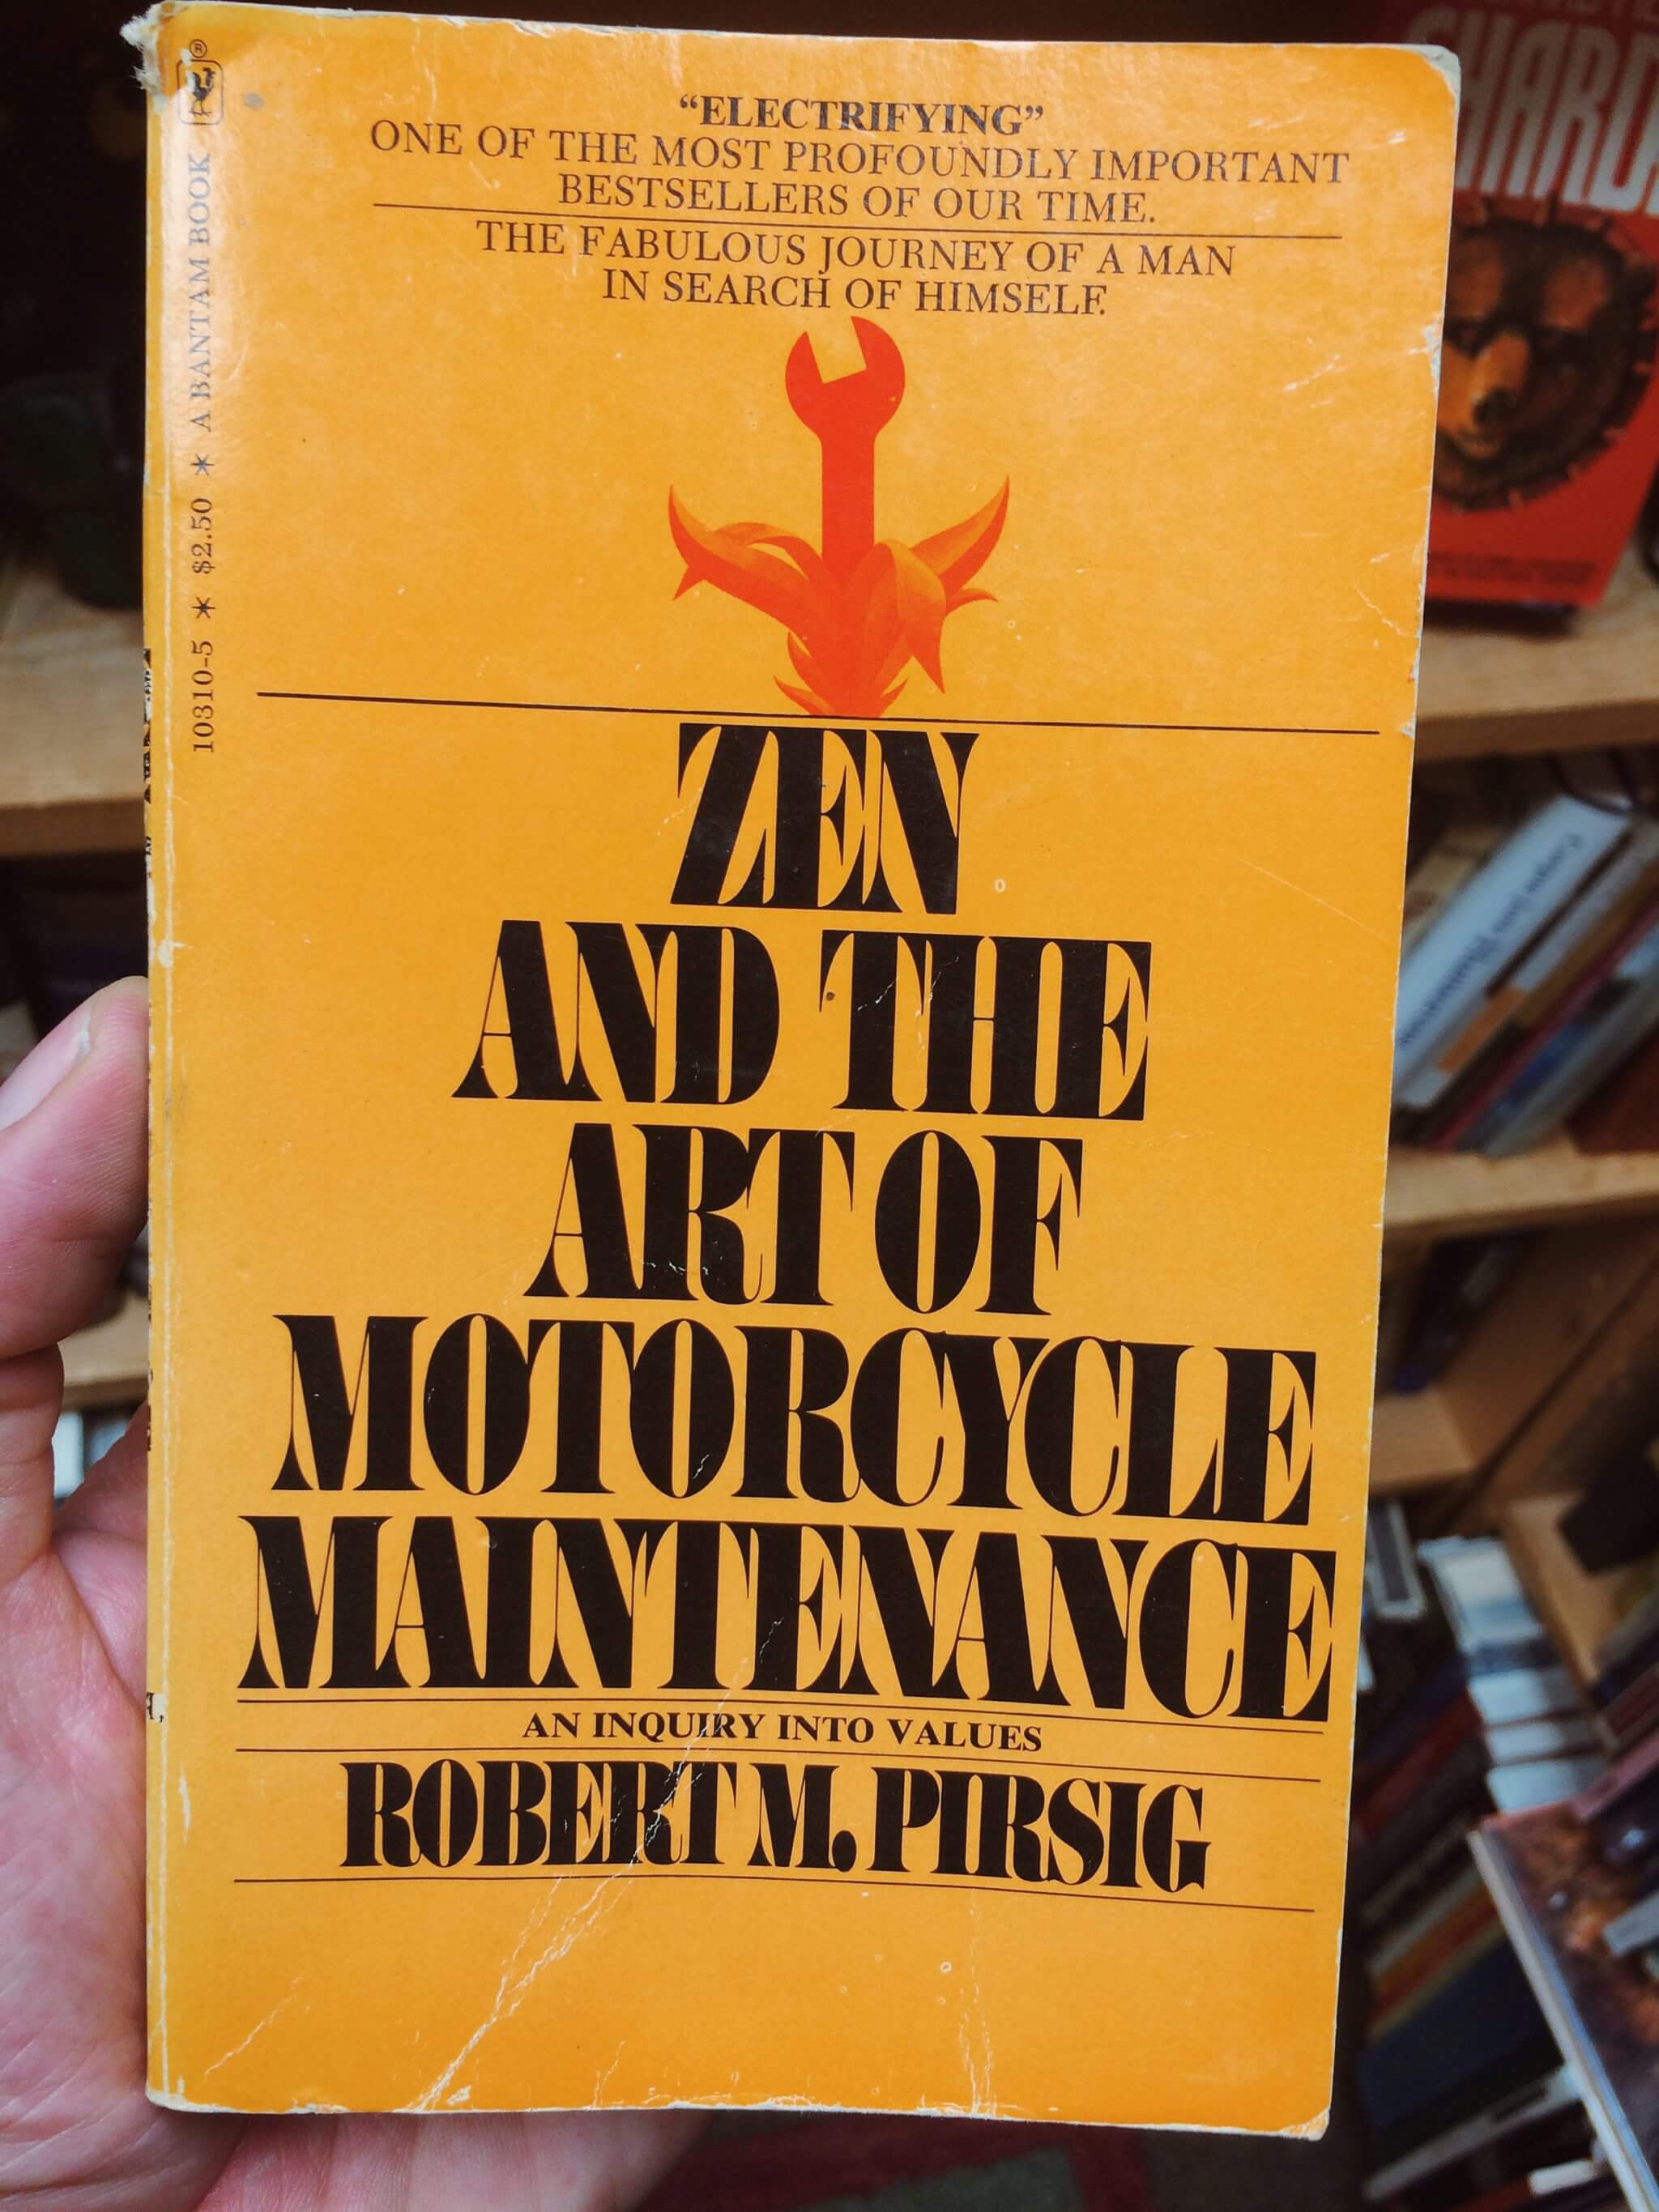 Zen and the Art of Motorcycle Maintenance by Robert Pirsig